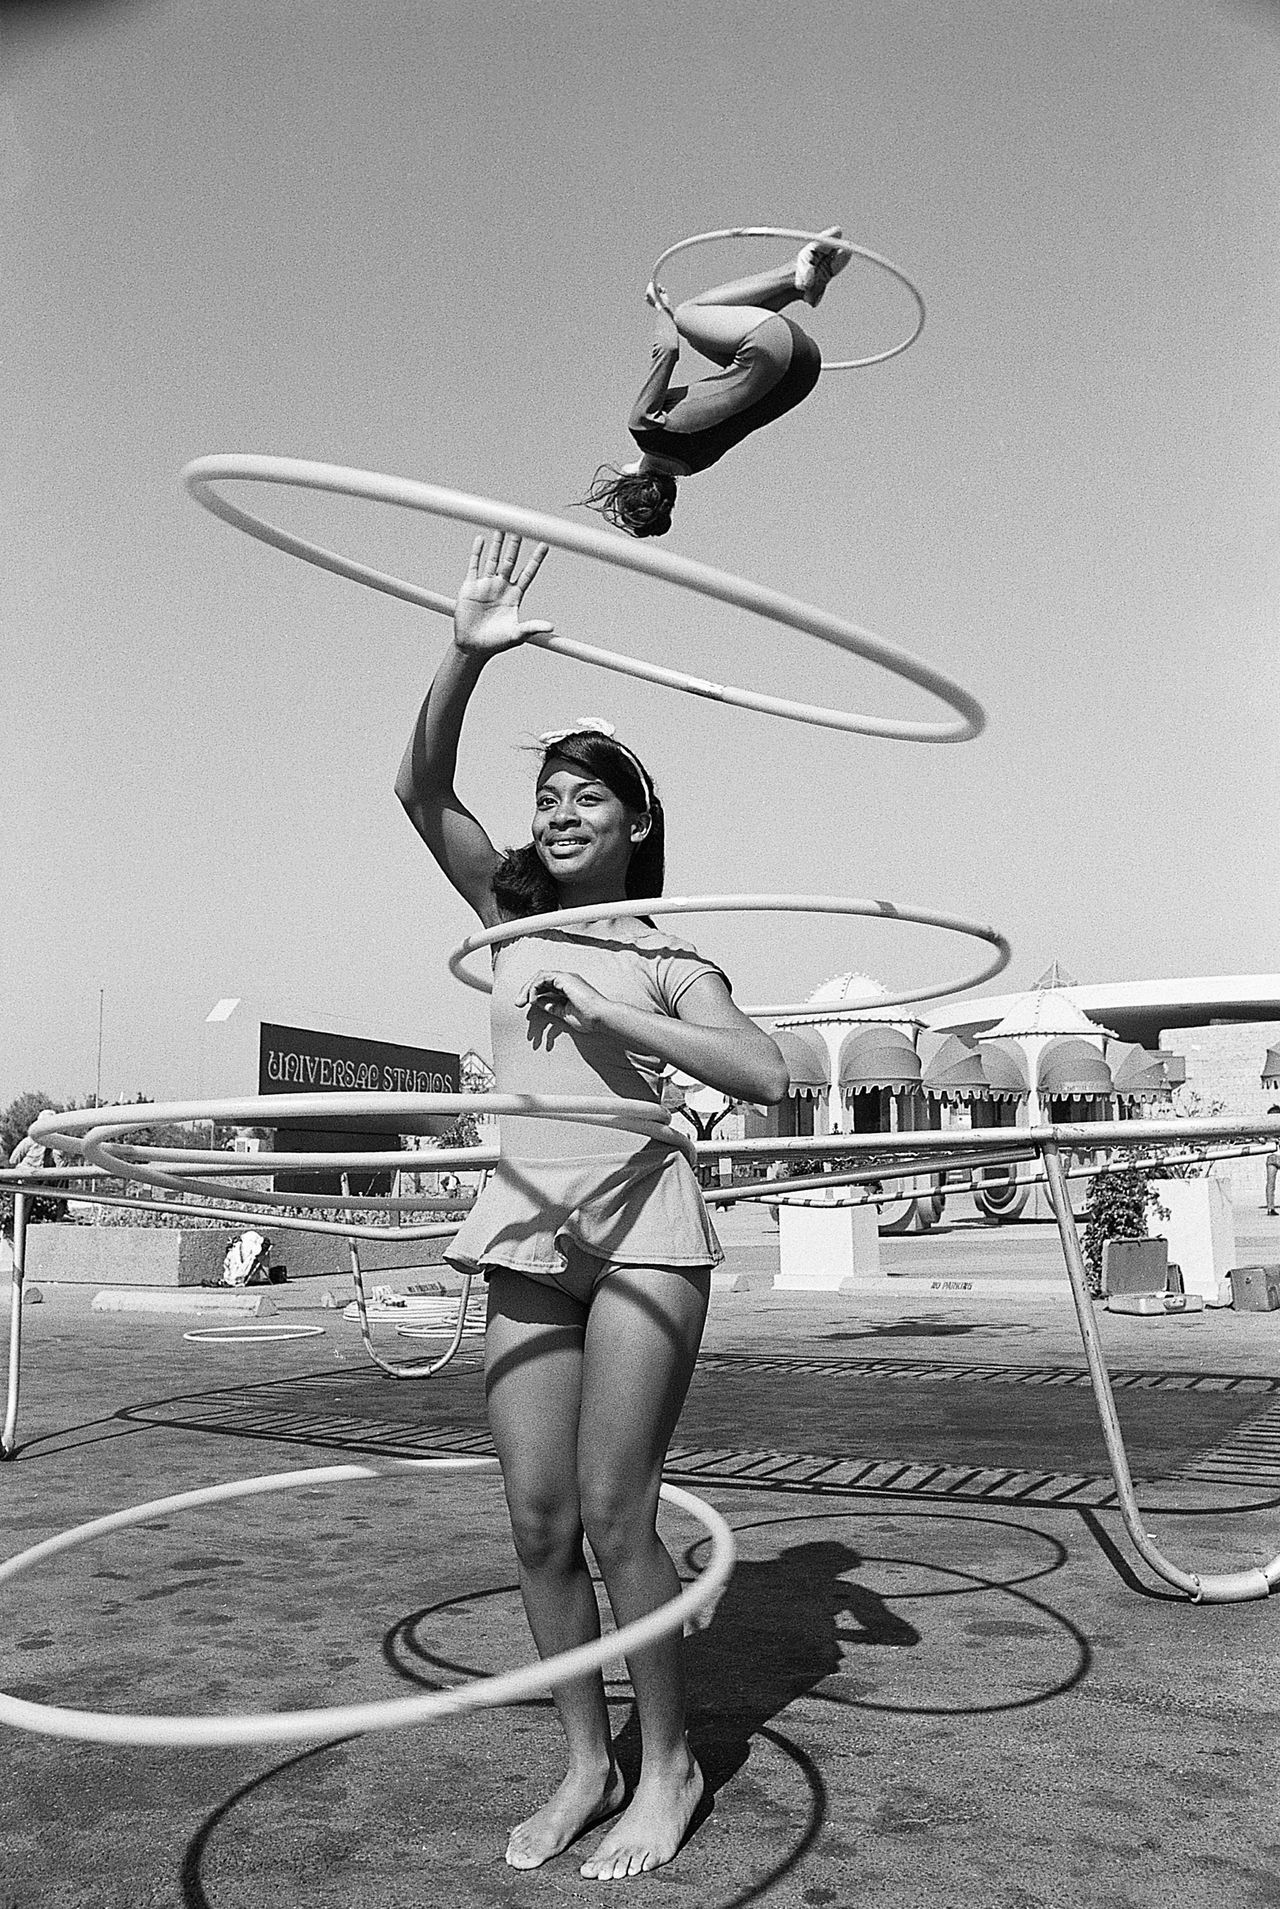 National hula hoop champion Sandra Gaylord spins her hoops in 1972, as world professional trampoline champion Judy Johnson does her thing using a hoop as well.